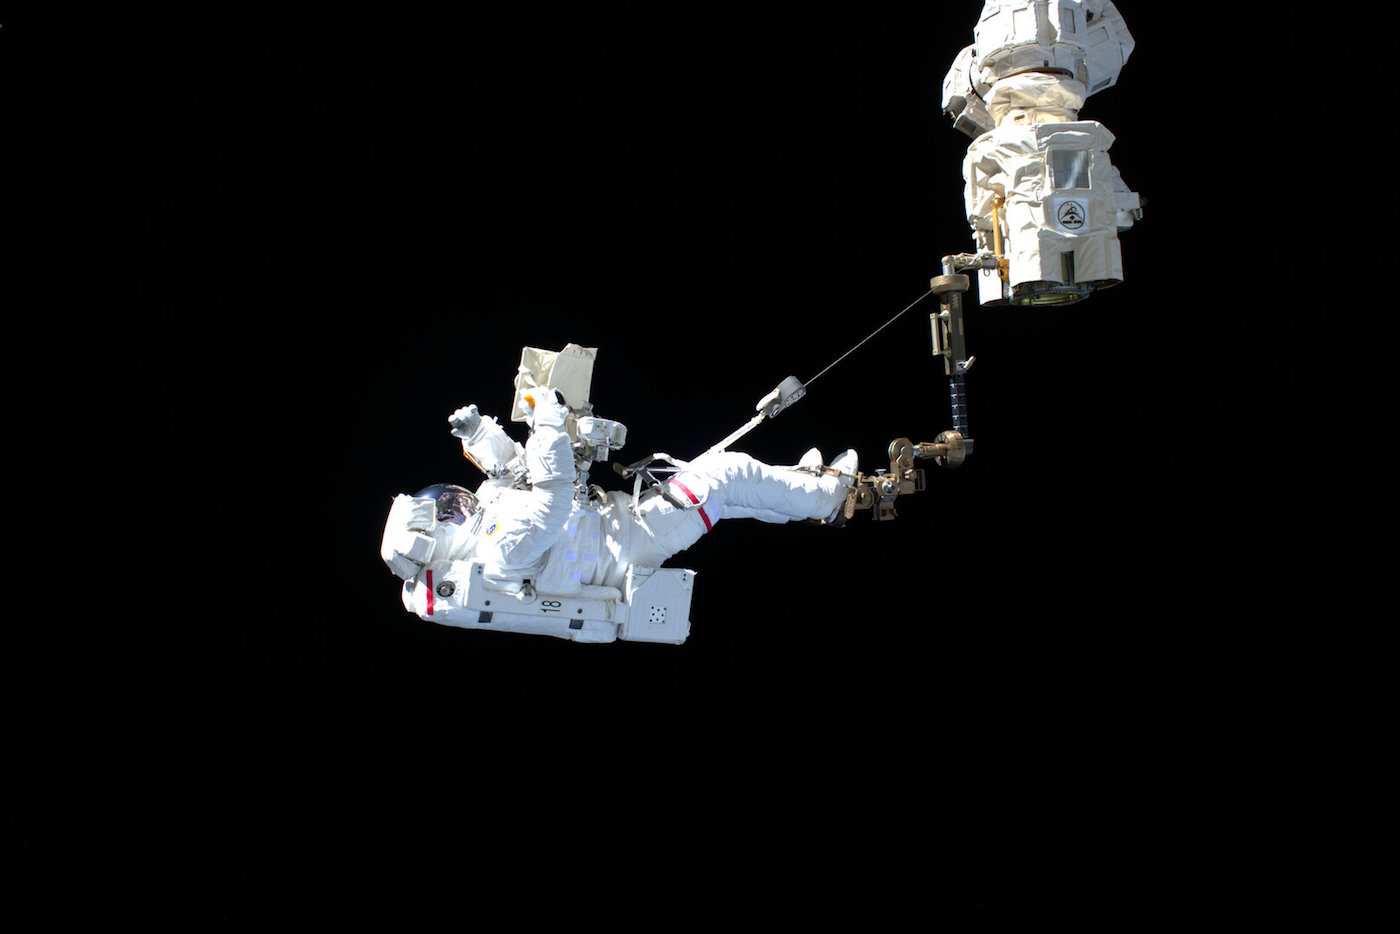 ESA astronaut Luca Parmitano imaged during the first spacewalk for AMS hitching a ride on the International Space Station’s 16-metre long robotic arm. 